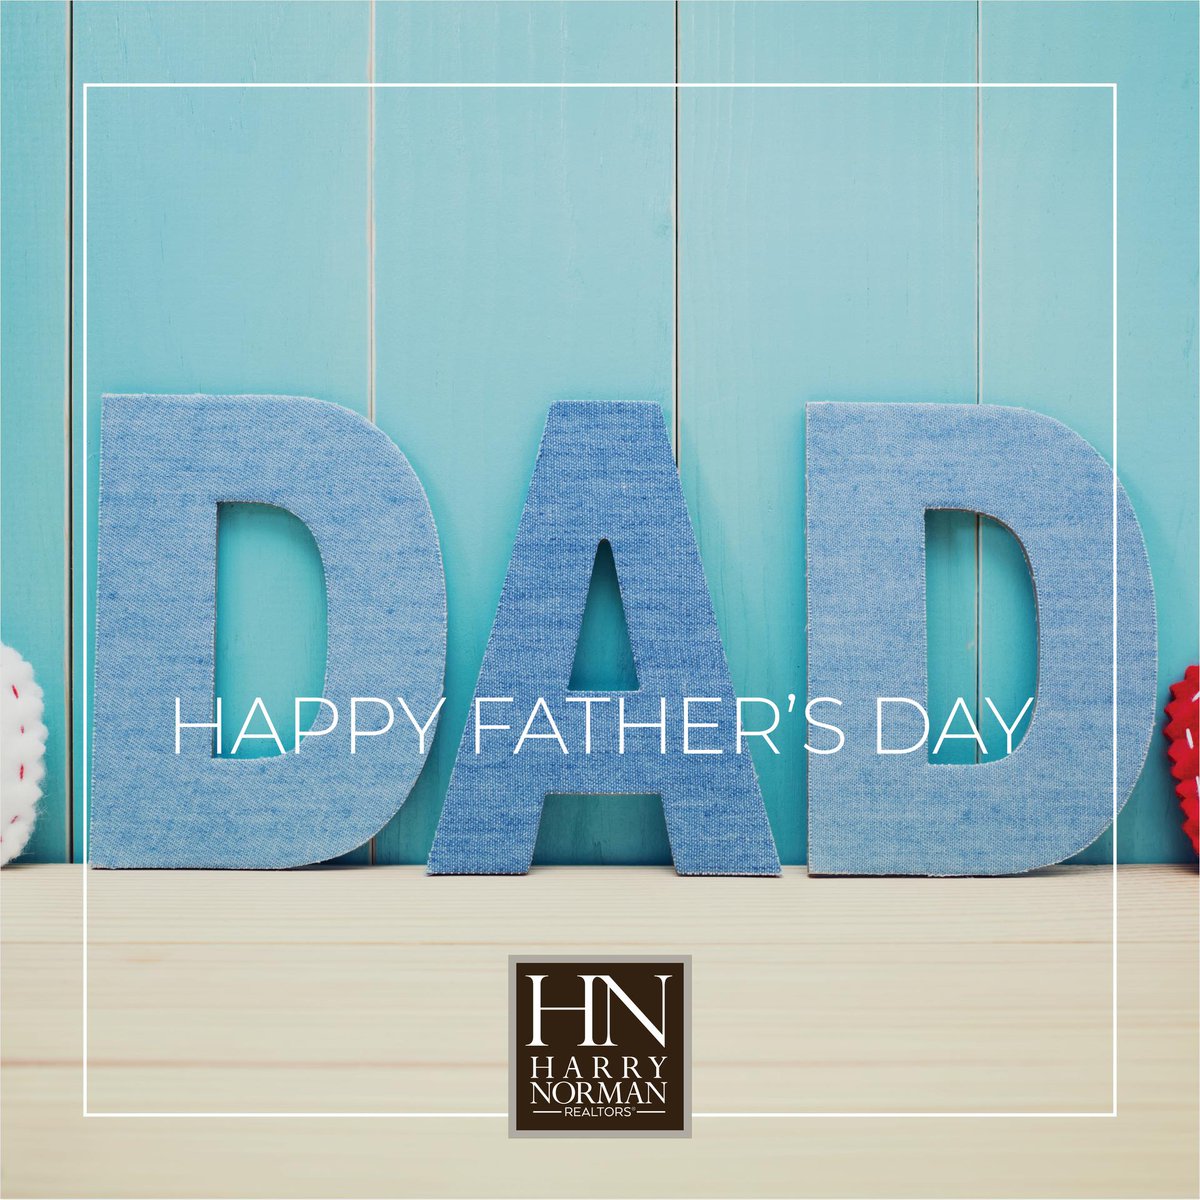 Wishing a fantastic Father's Day to the rockstar dads in the community! Your dedication, hard work, and love for your family are truly admirable. May this day be filled with laughter, relaxation, and unforgettable moments.

Happy Father's Day!

#FathersDayCelebration